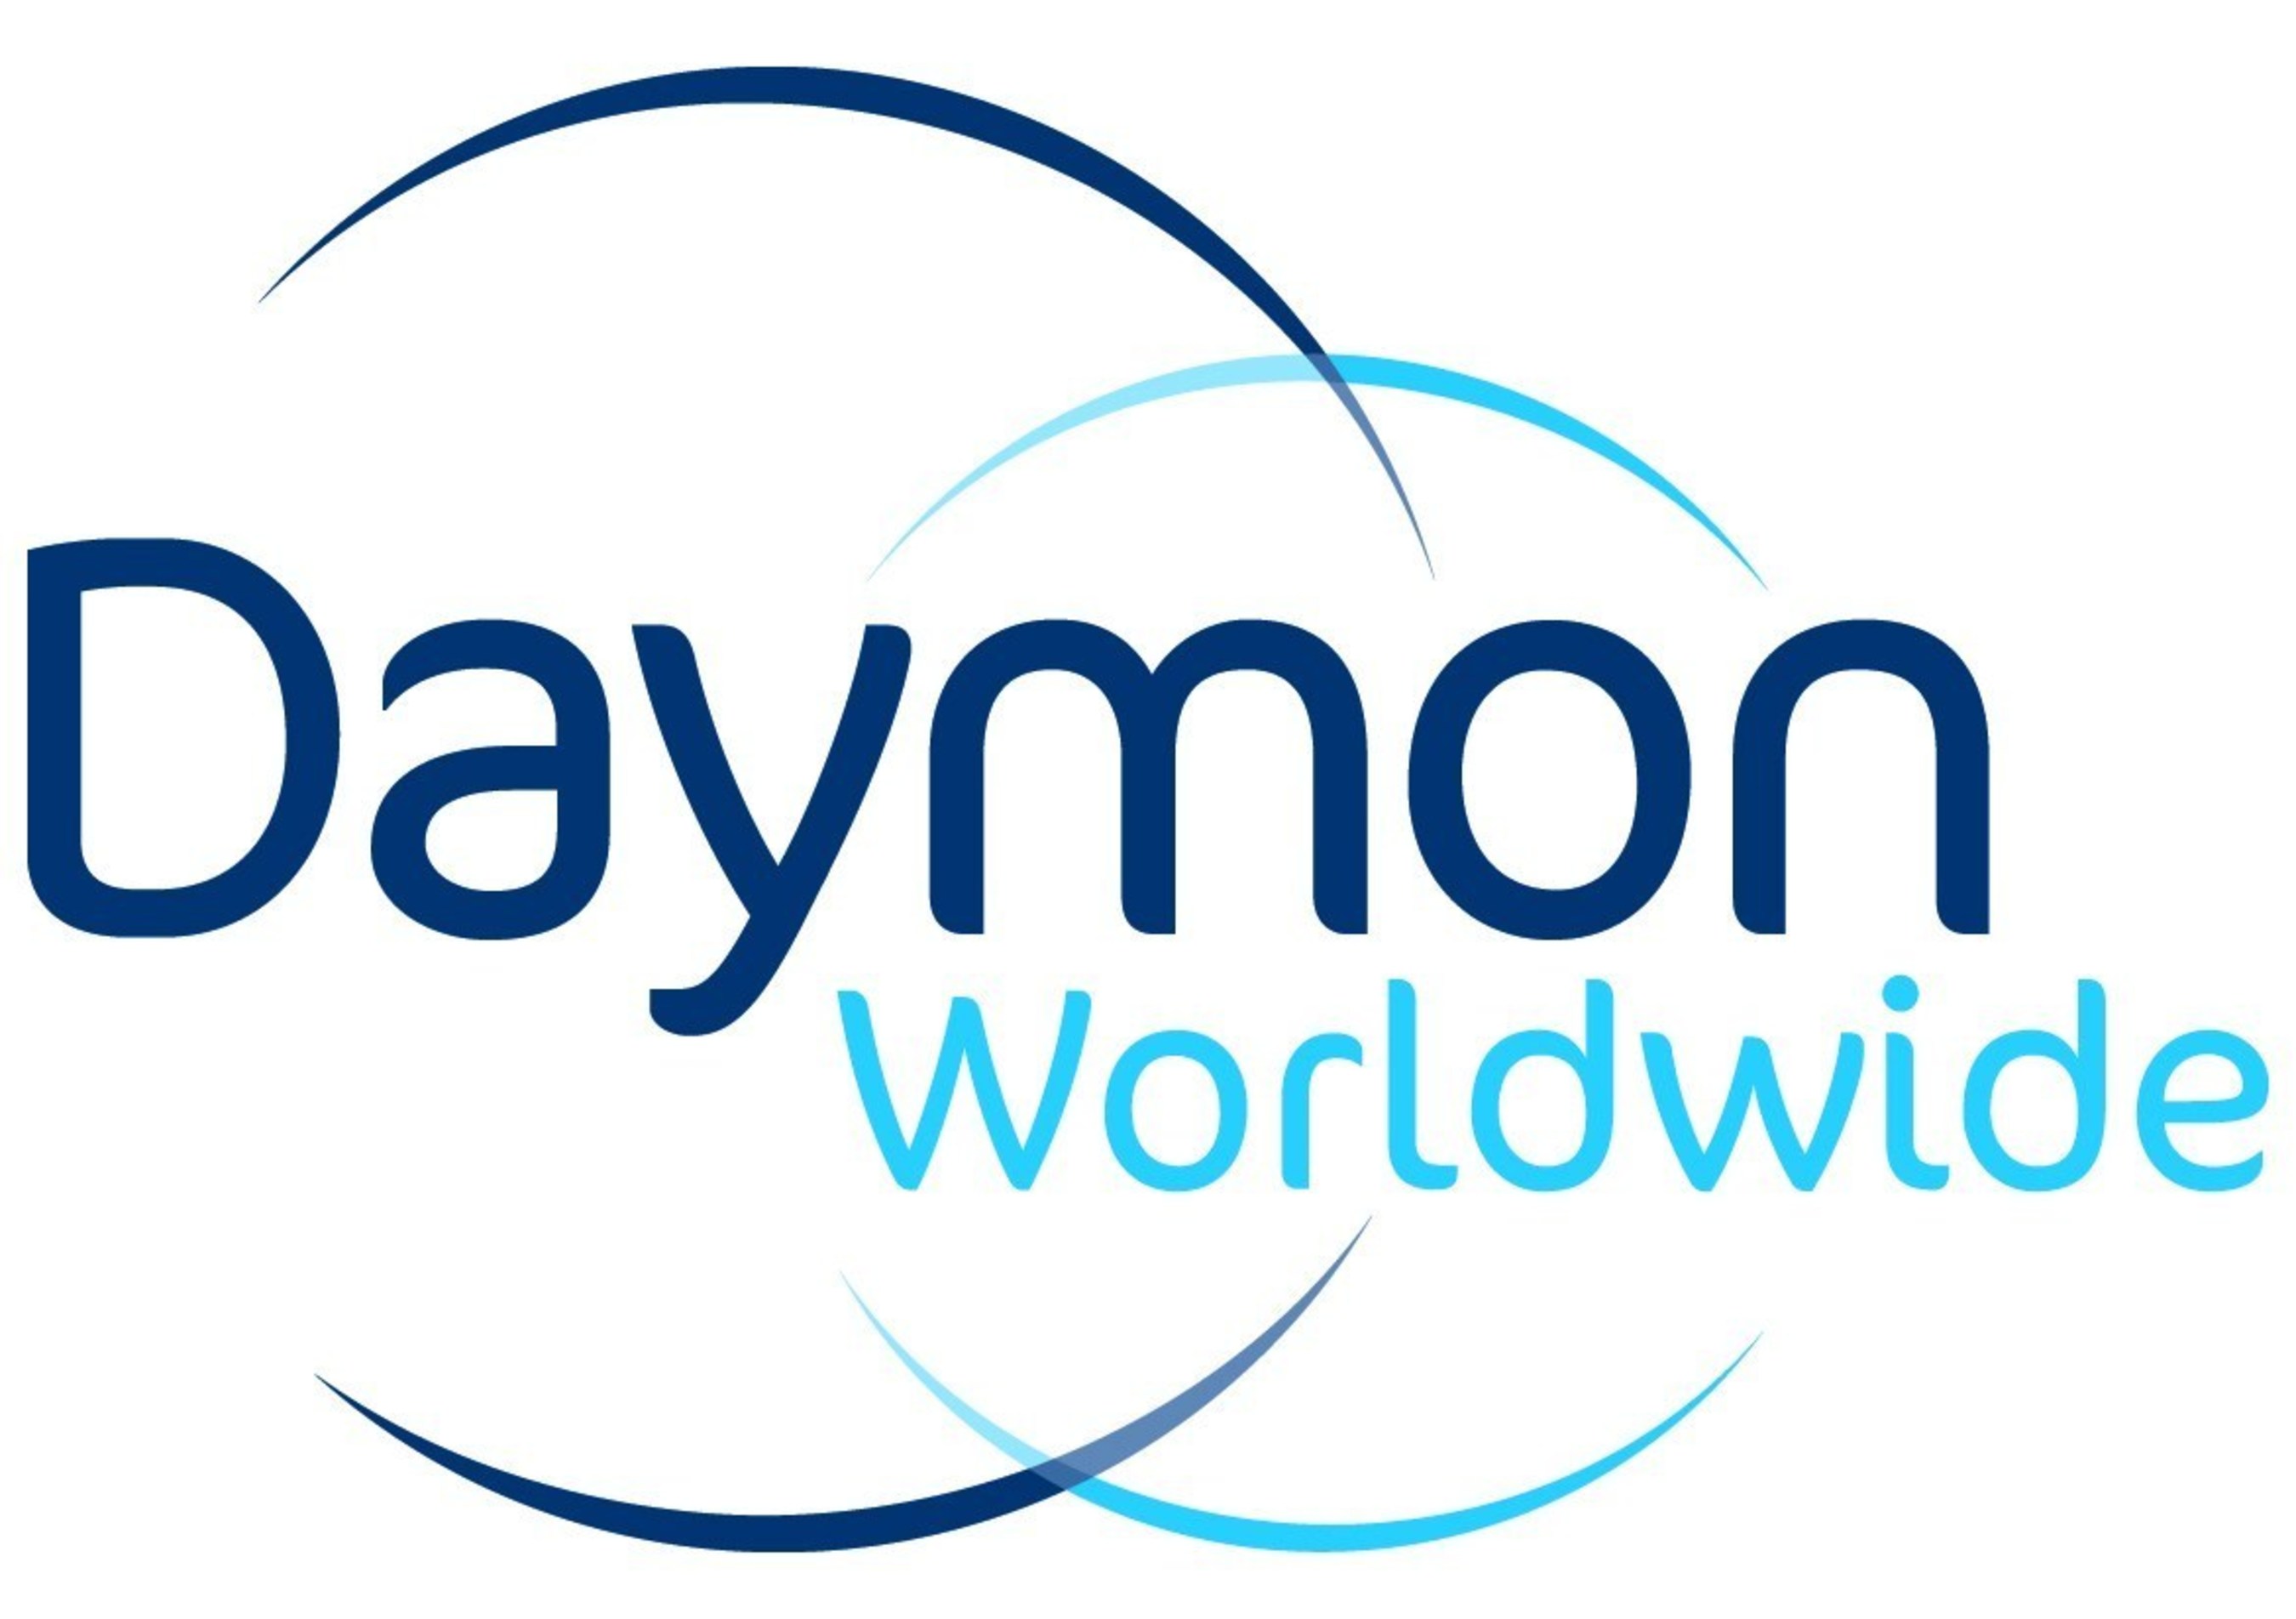 Daymon Worldwide is a global leader in consumables retailing and private brand development pioneer.